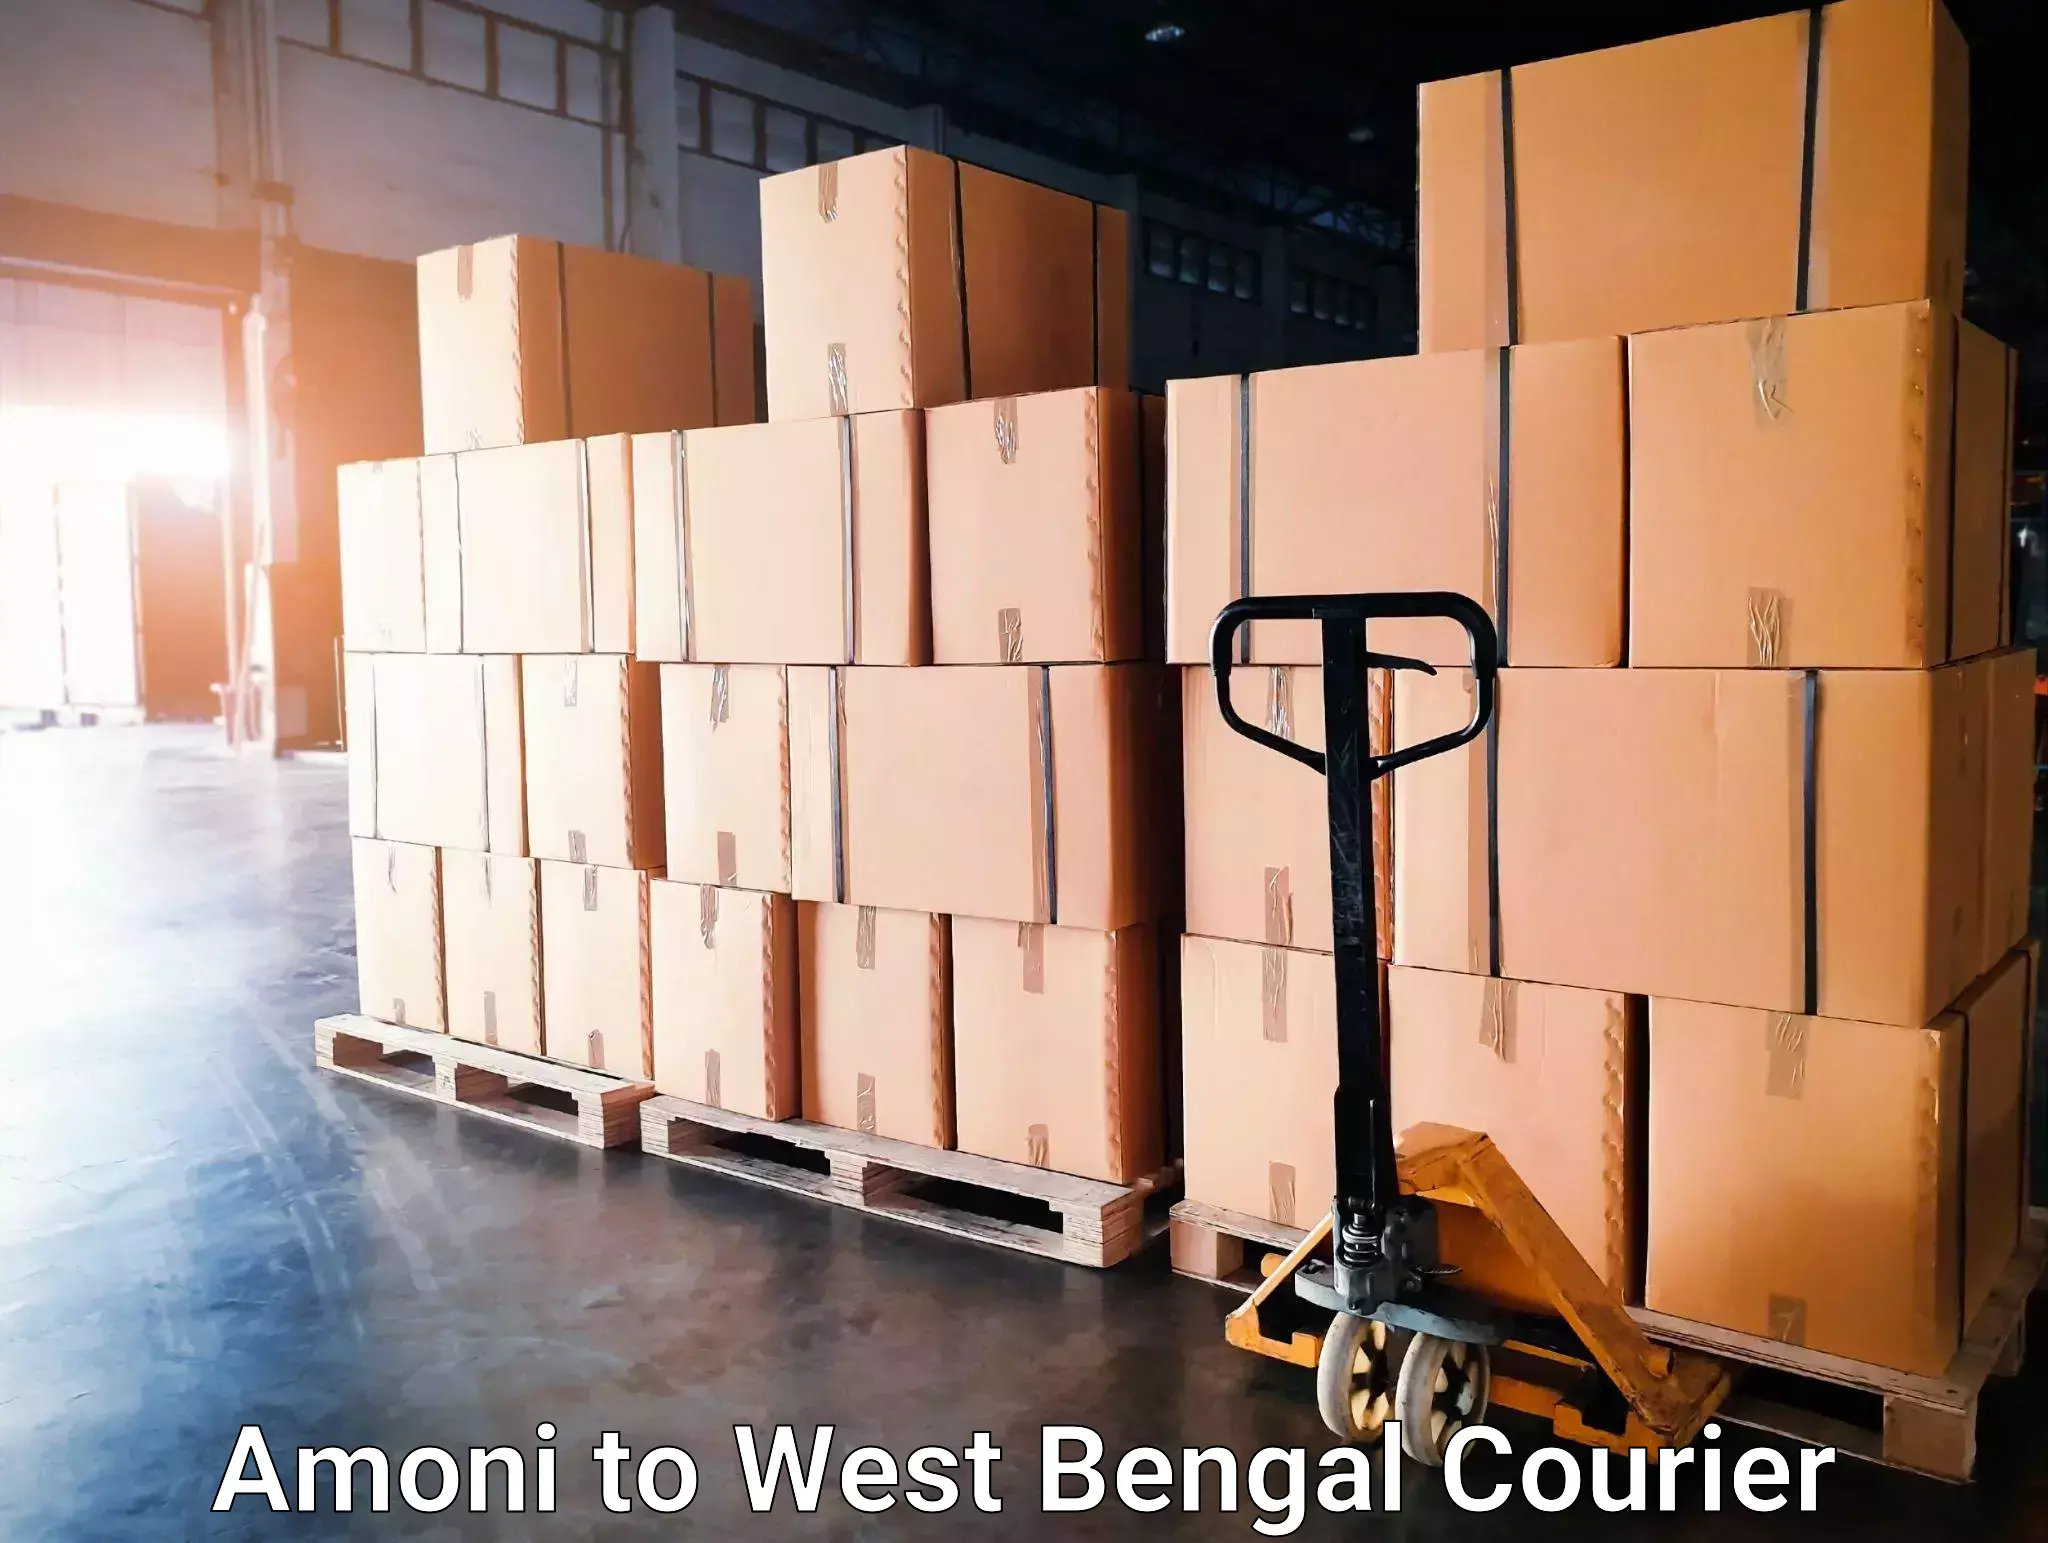 Express mail service in Amoni to West Bengal